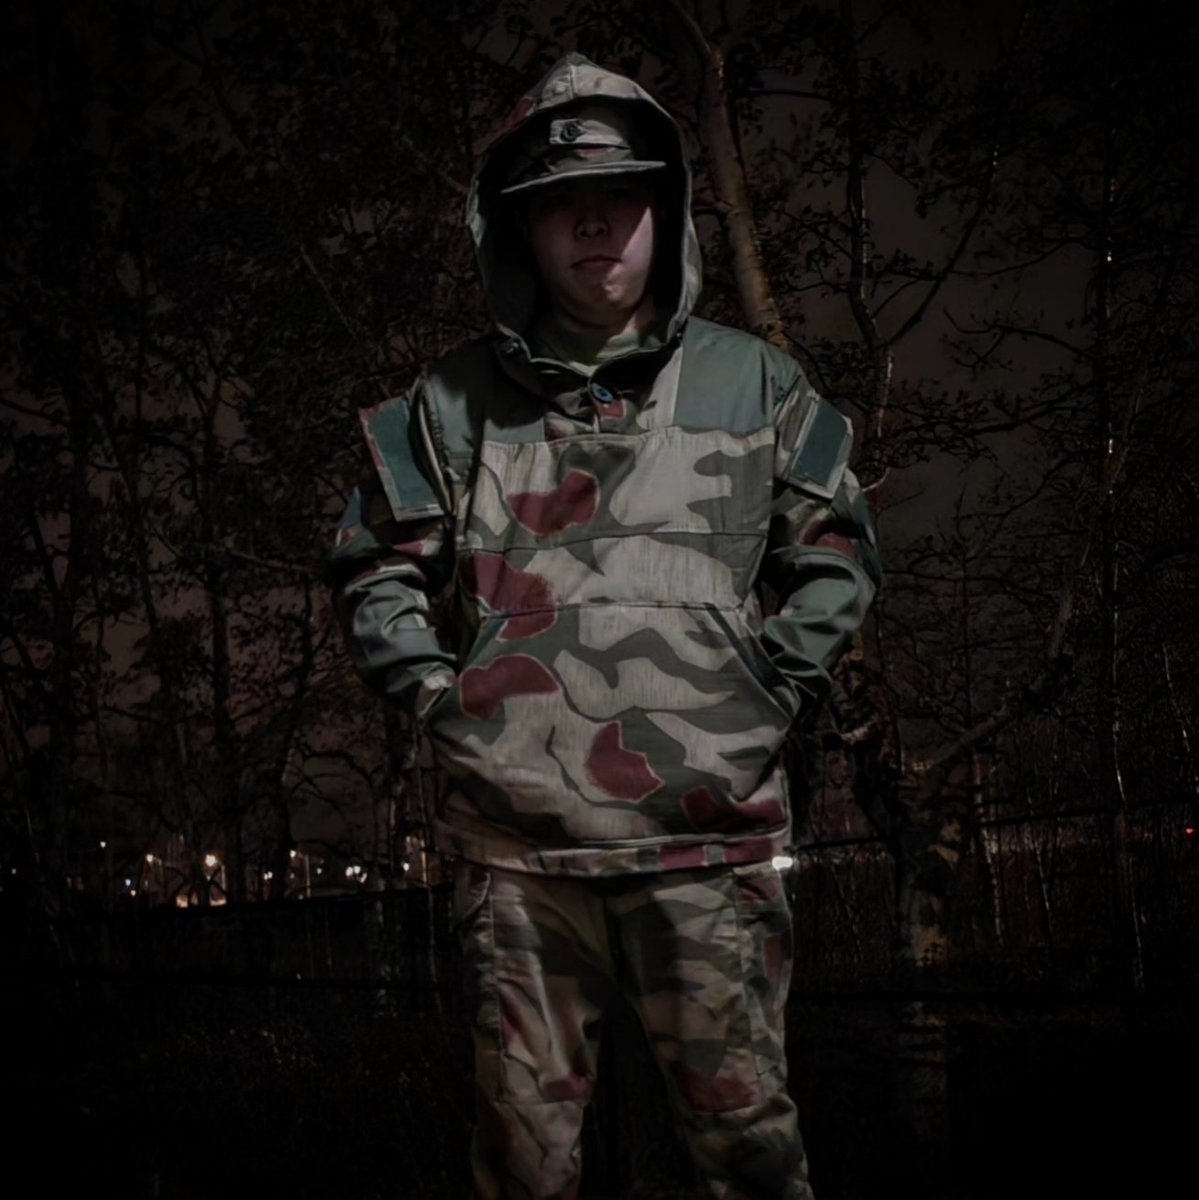 M-43 Mountain Cap x Recce Anorak

The best combo just dropped in for West German Sumpftarn. 

Available now, link in bio

#fireforceventures #westgermany #sumpftarn #bgs #history #coldwarhistory #tactical #recce #militaria #hunting #tacticalgear #tacticalkit #camo #anorak